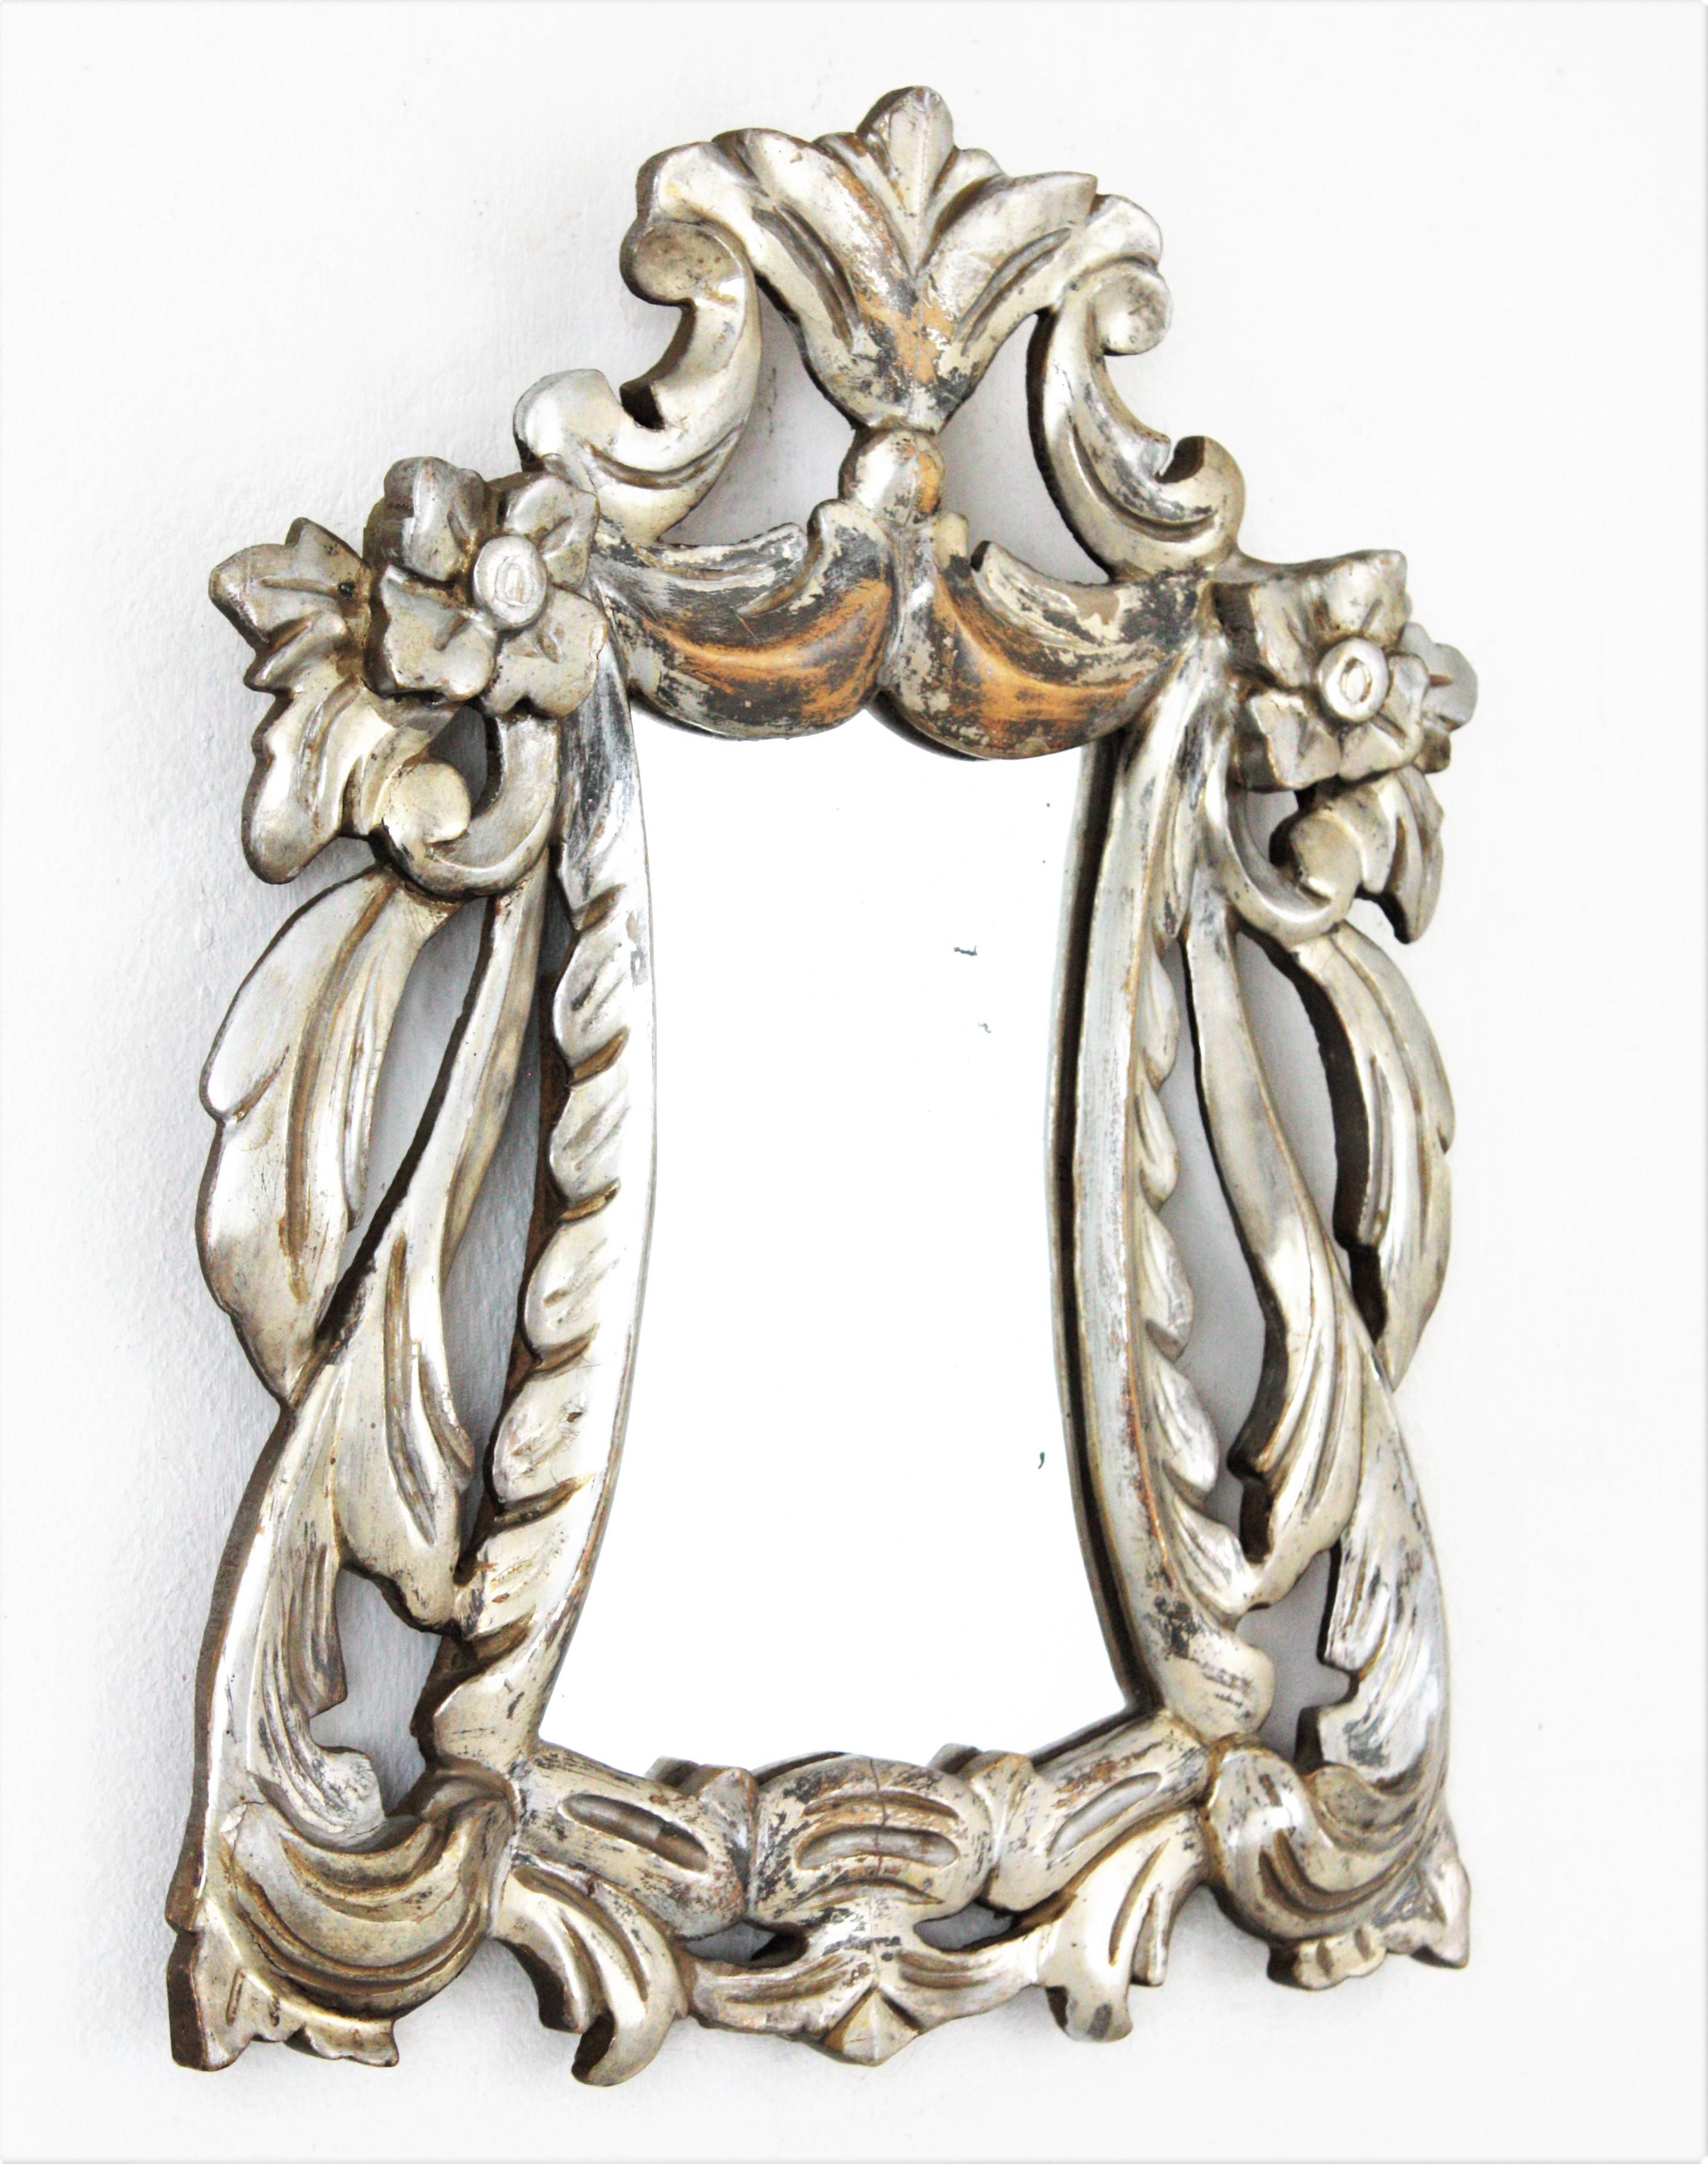 Foliage Floral Petite Wall Mirror, Carved Wood, Silver Leaf.
A lovely hand carved small mirror with silver leaf finishing, Spain, early 20th century.
This beautiful mirror has a frame with foliage motifs and carved flowers.
This piece still retains